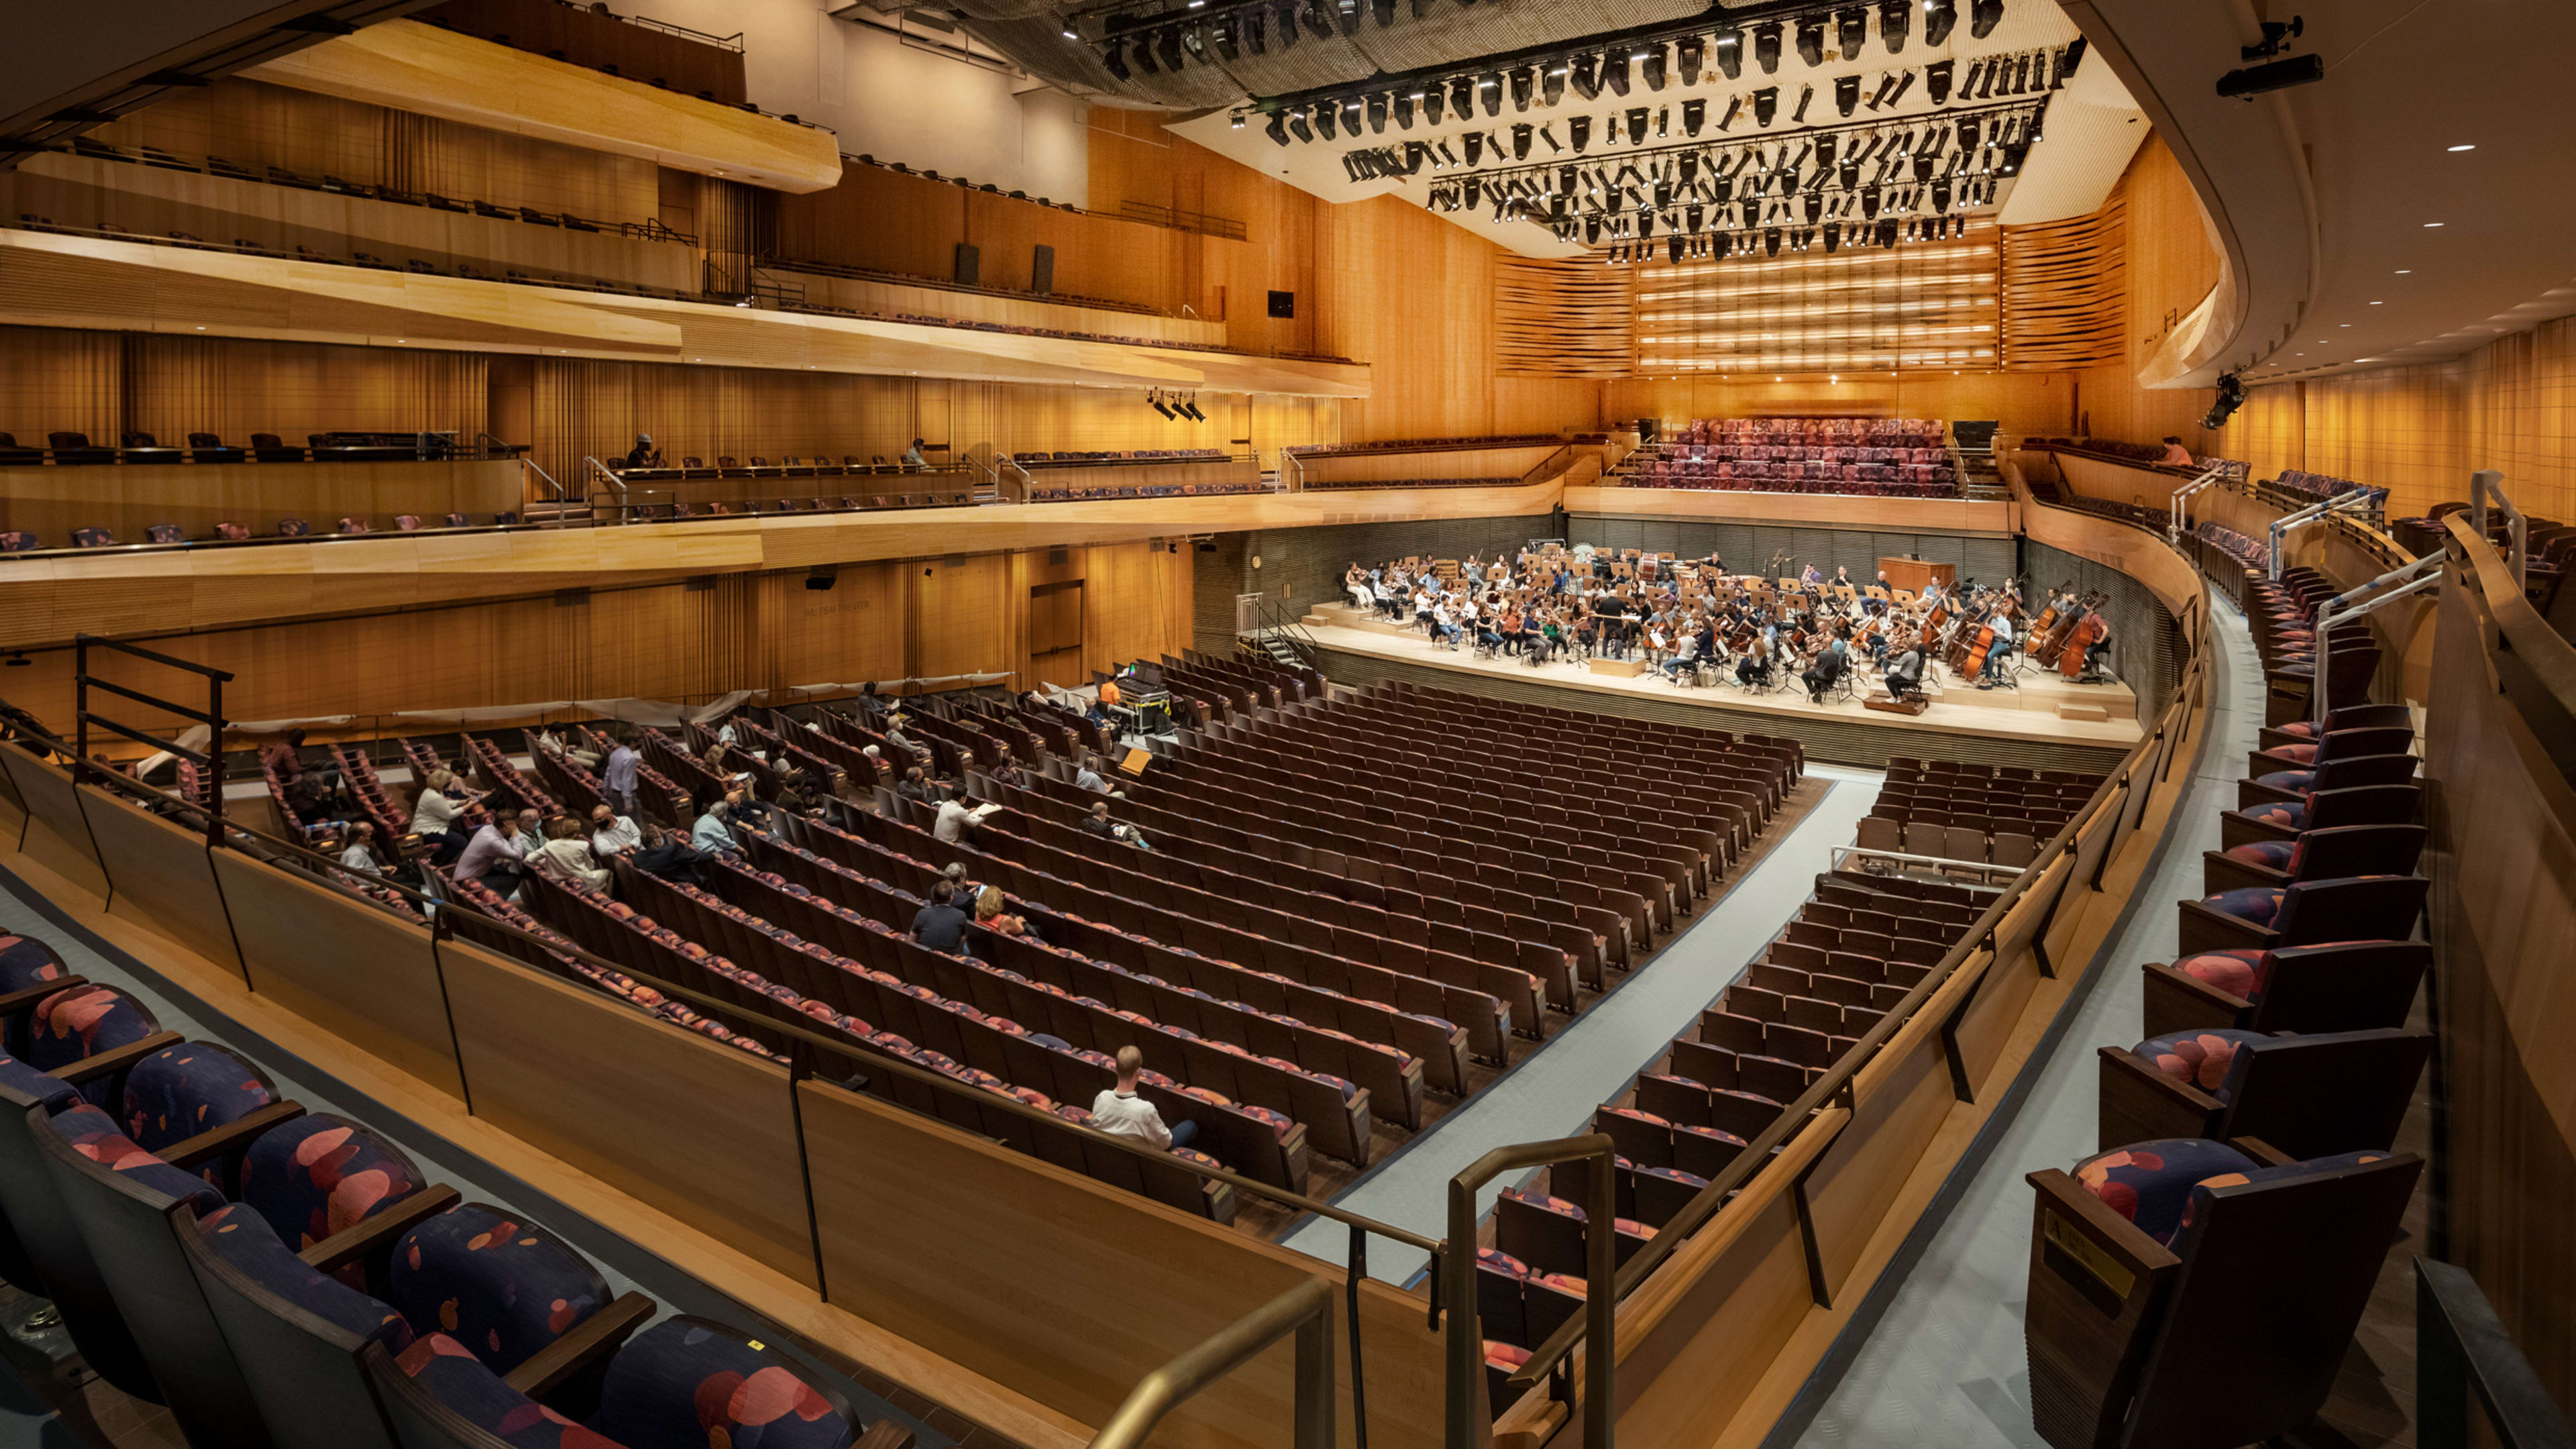 Lincoln Center revamps a concert hall—and its mission—from the inside out